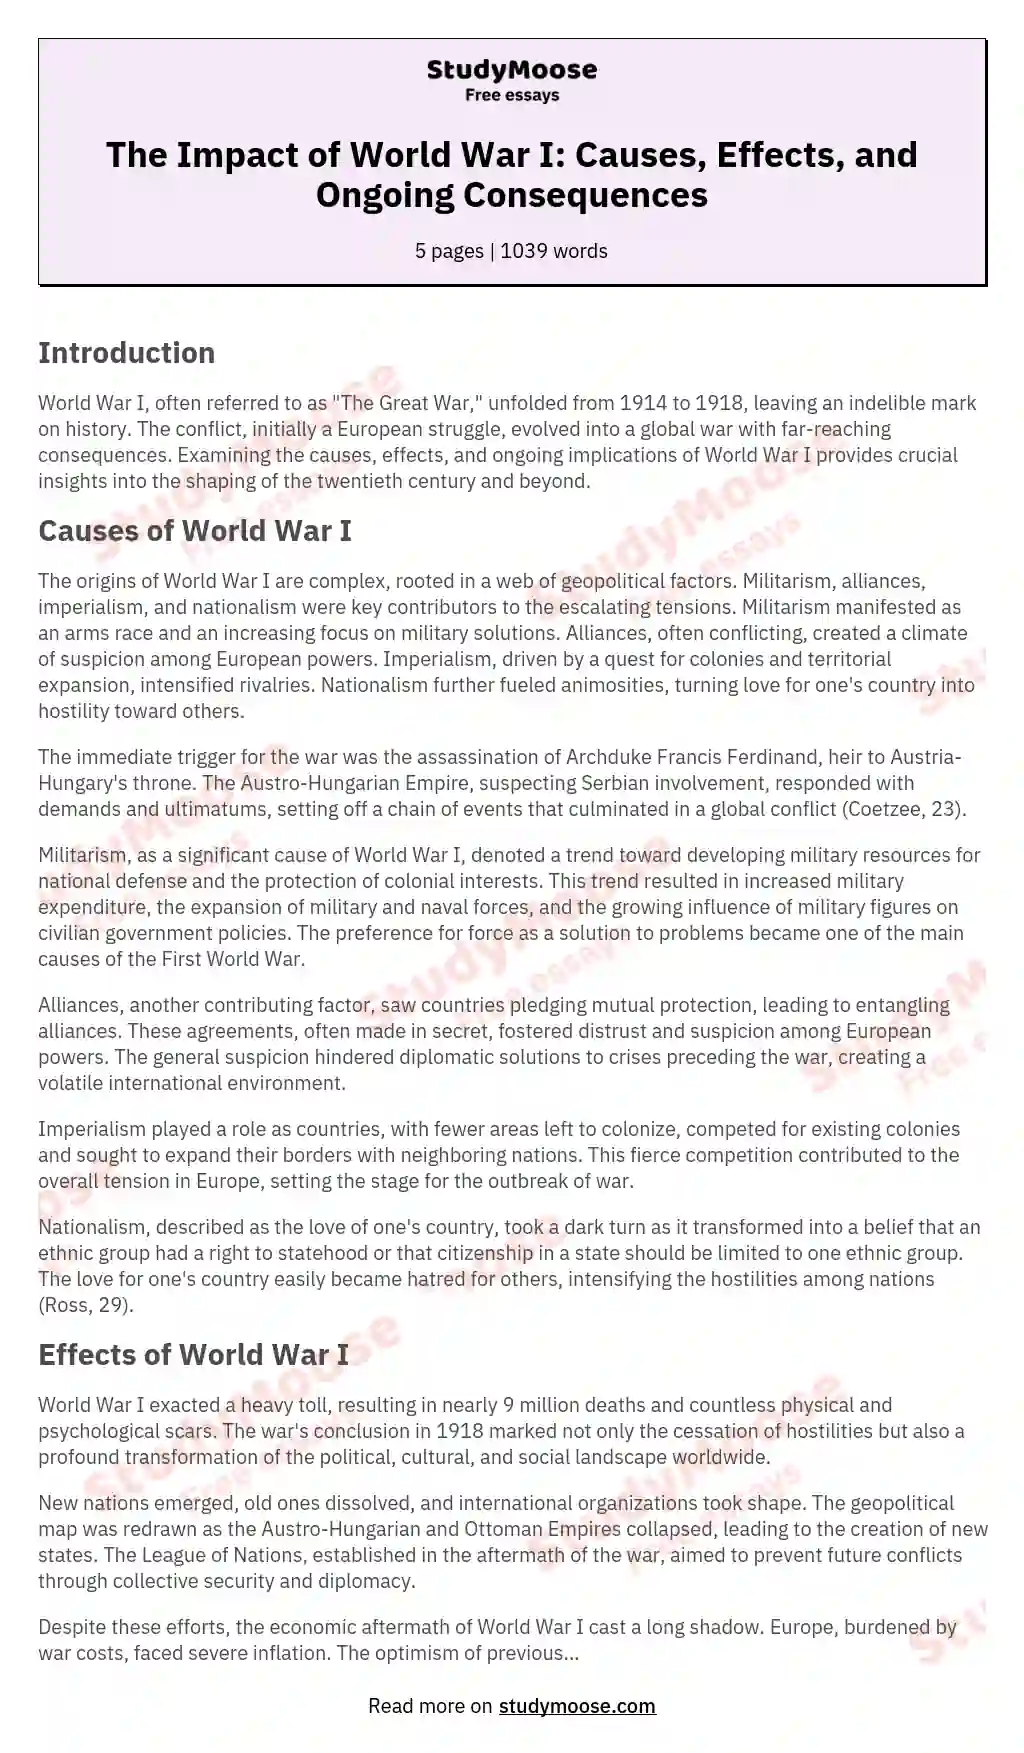 war and its effects essay